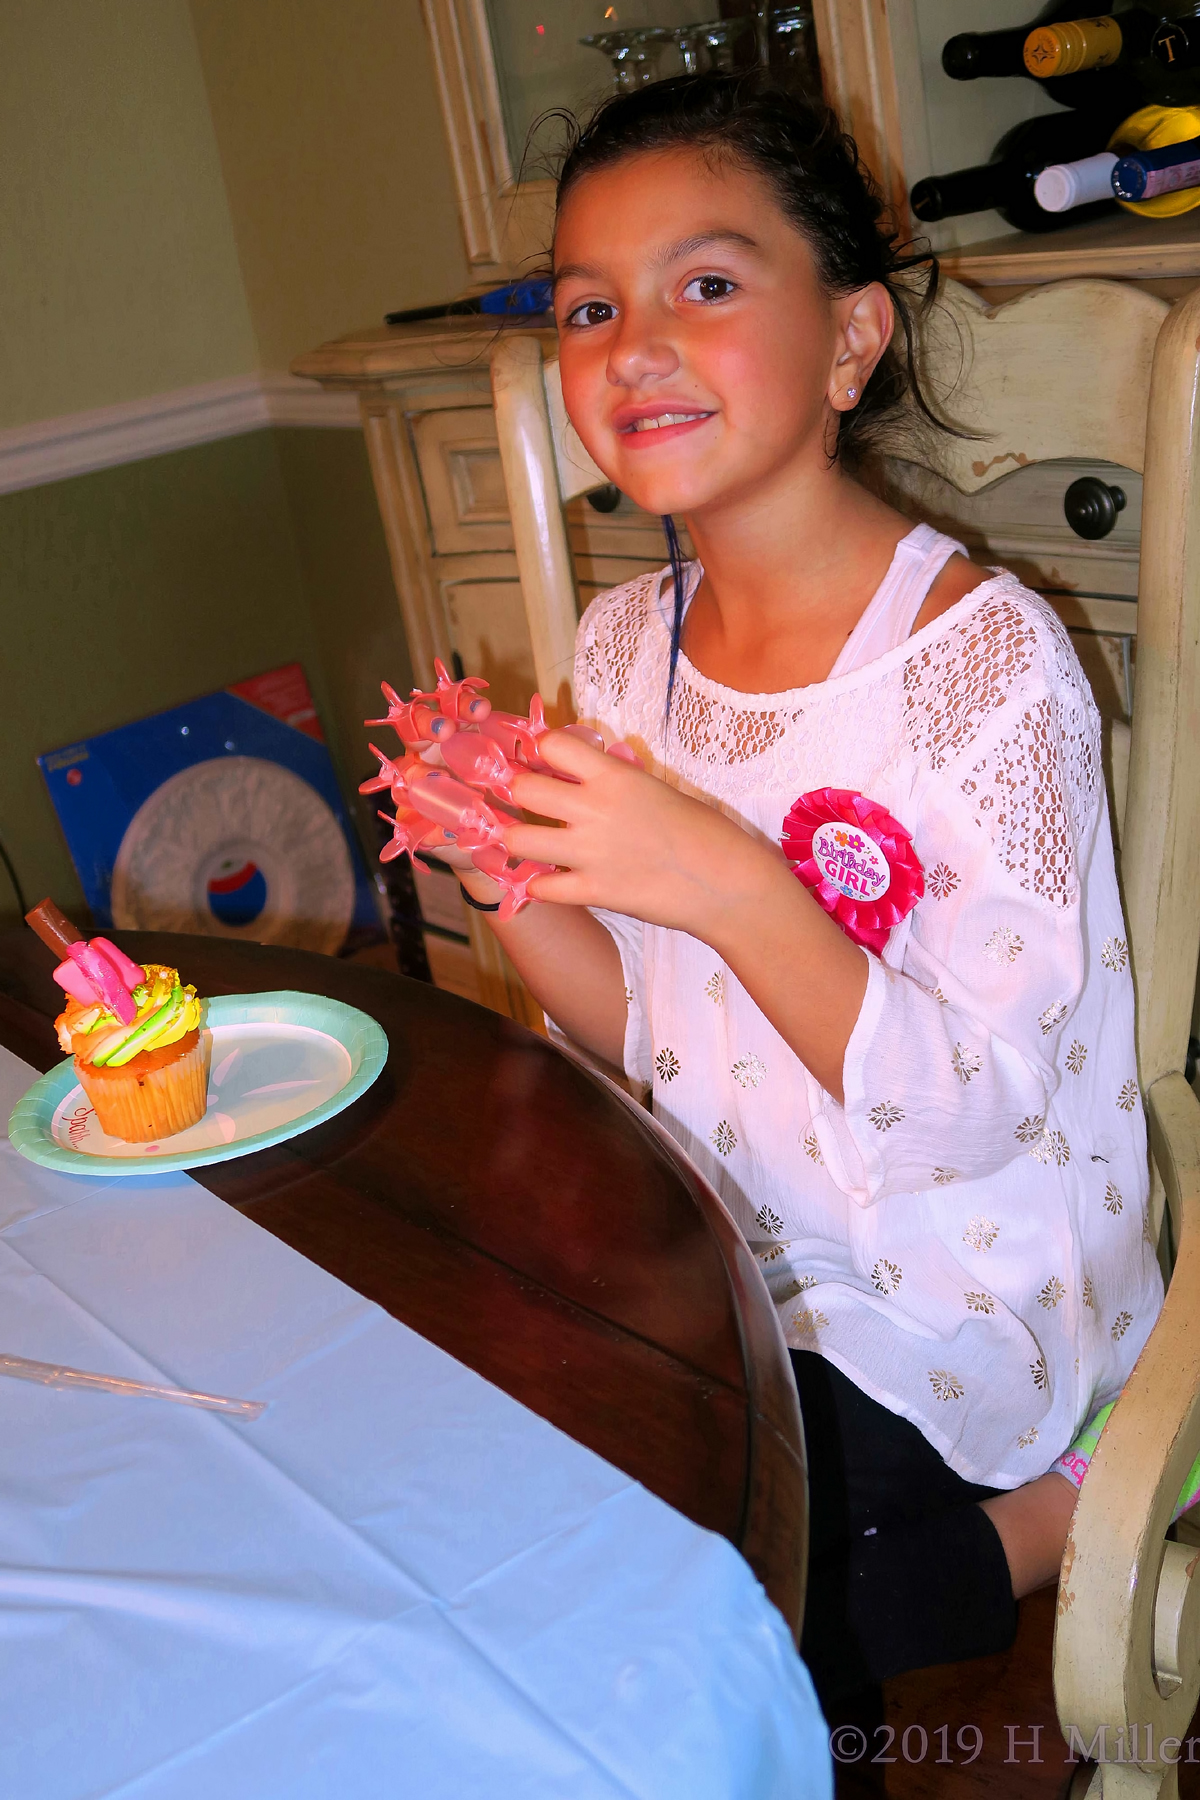 What A Wonderful World! Birthday Girl Eats Baked Goods At The Spa For Girls!